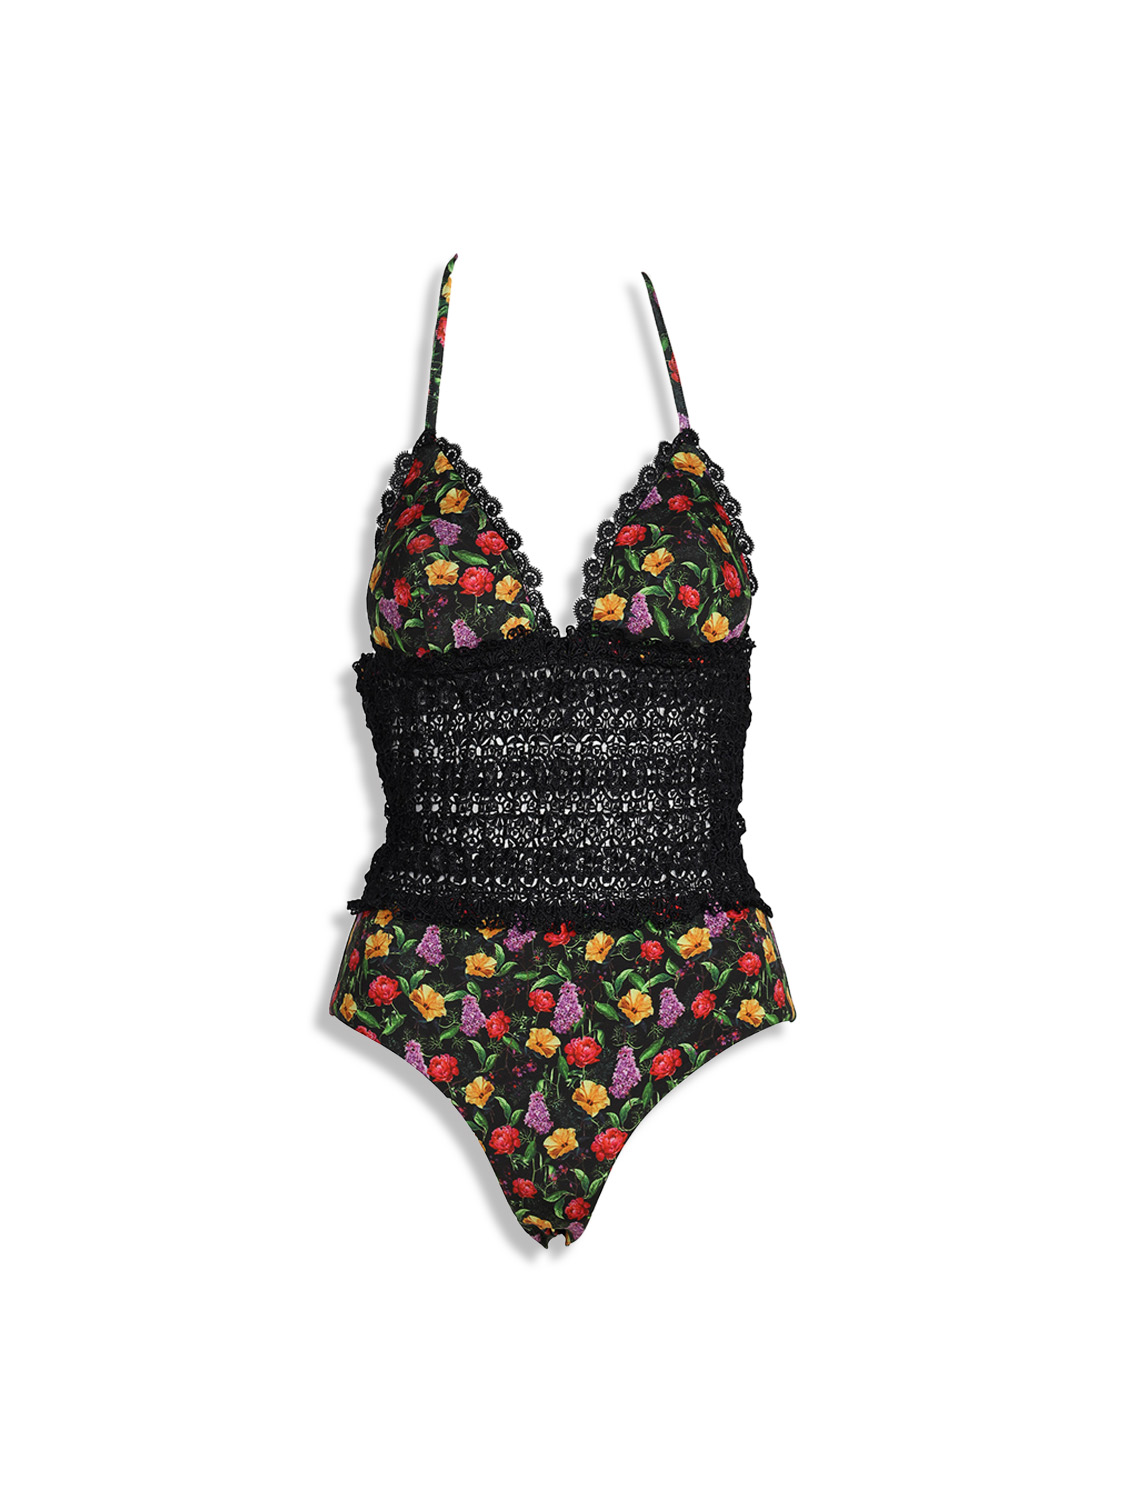 Rola - Swimsuit with floral pattern and lace details